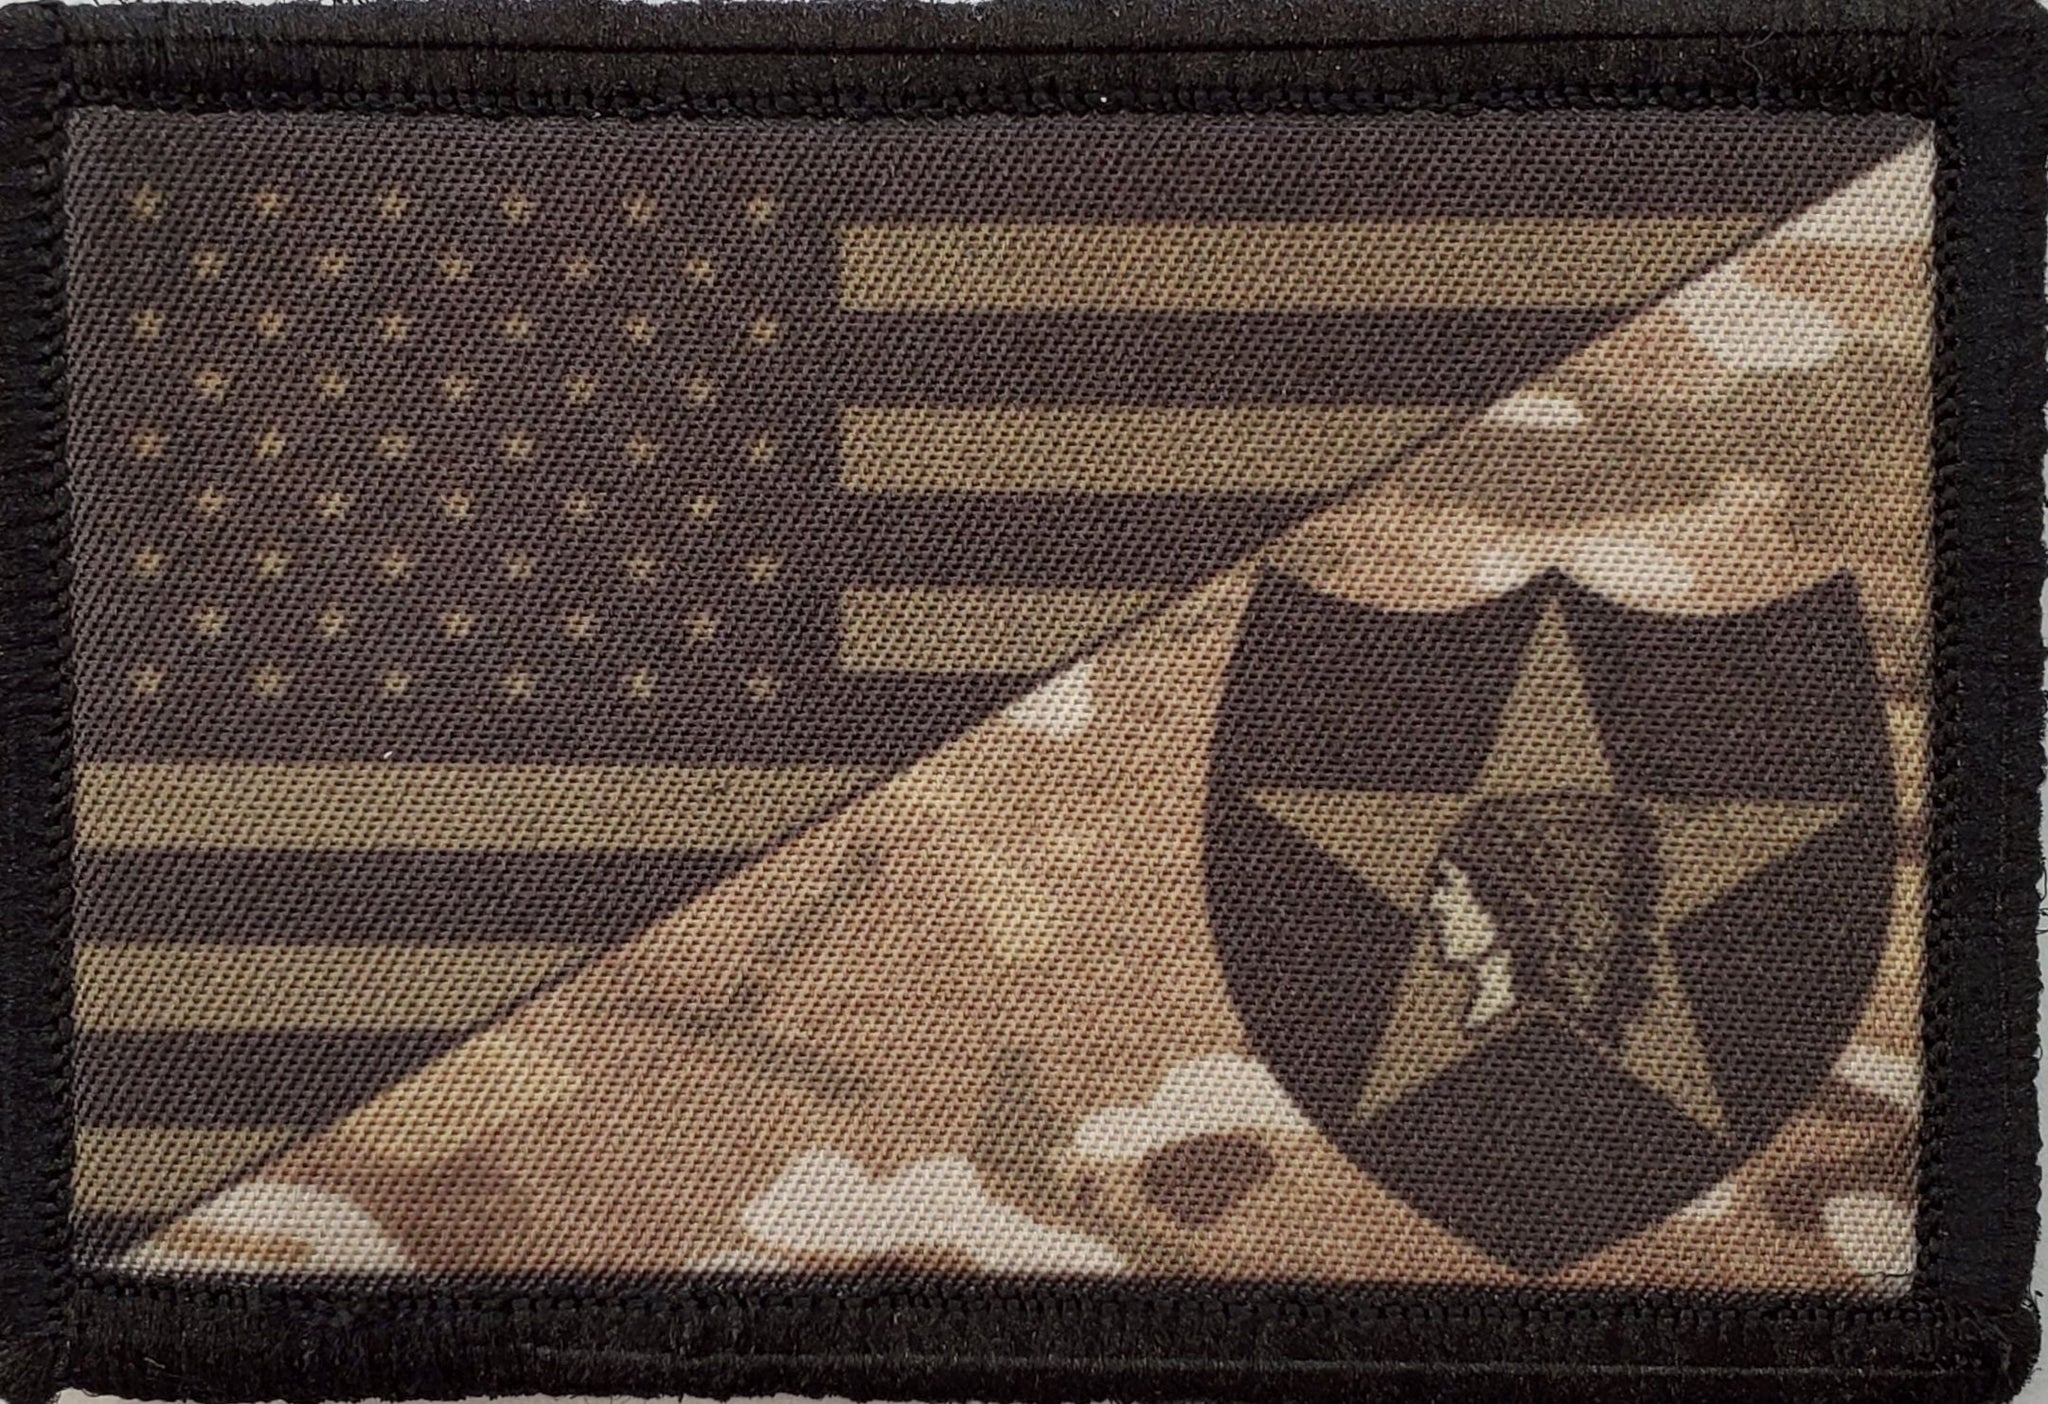 Subdued 2nd Infantry Division USA Flag CUstom Velcro Morale Patch